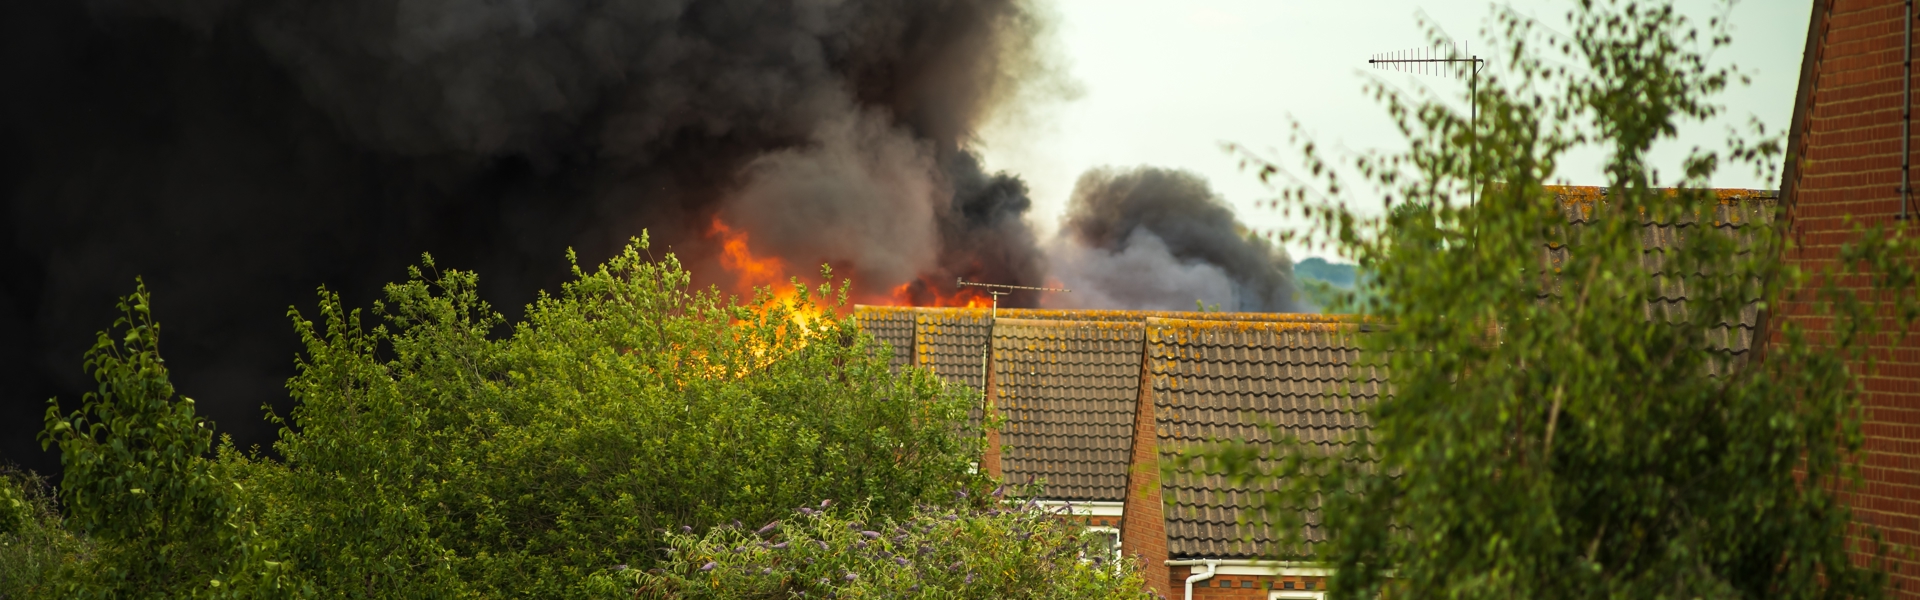 A row of houses covered largely by trees and bushes. The house at the back is on fire with black billowing smoke. 